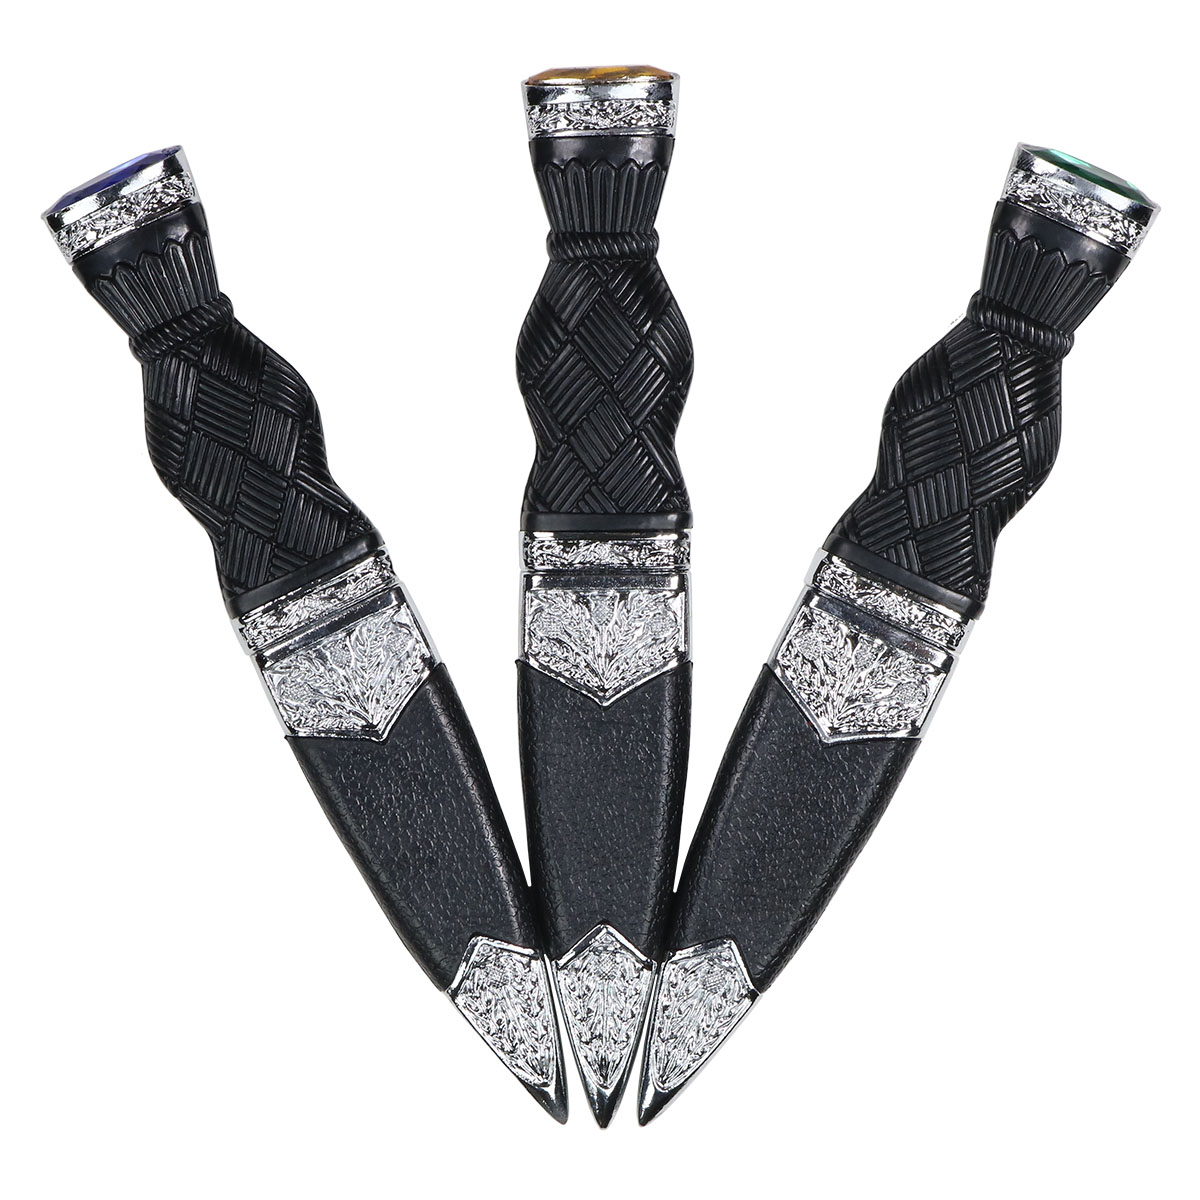 Three black and white Traditional Sgian Dubh knives, featuring diamonds, with a standard sgian dubh design.